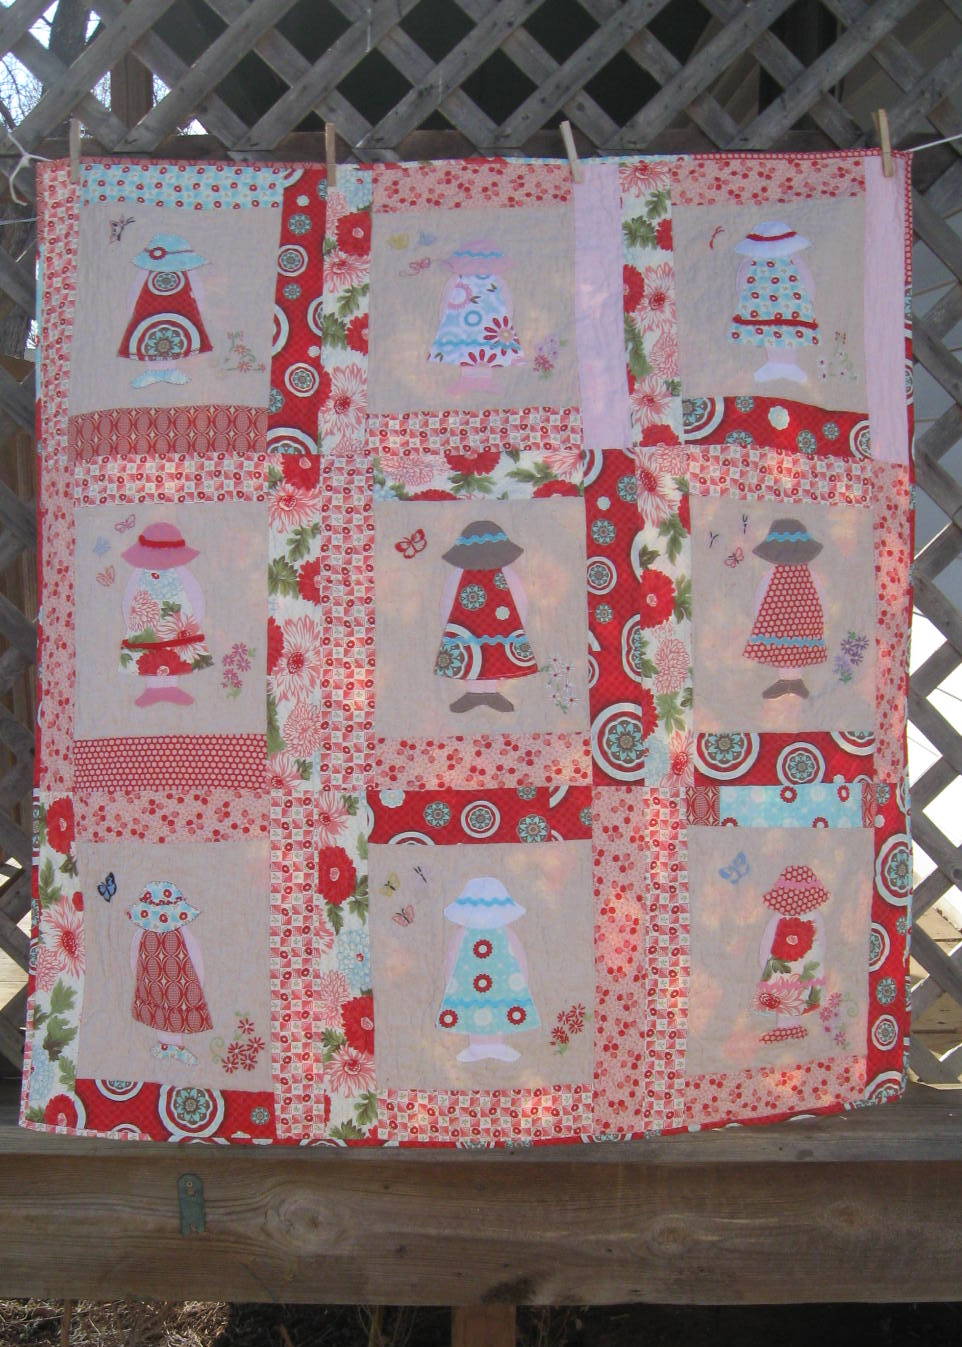 Curly Mom's Blog: My Quilt Entry for the Bloggers Quilt Festival